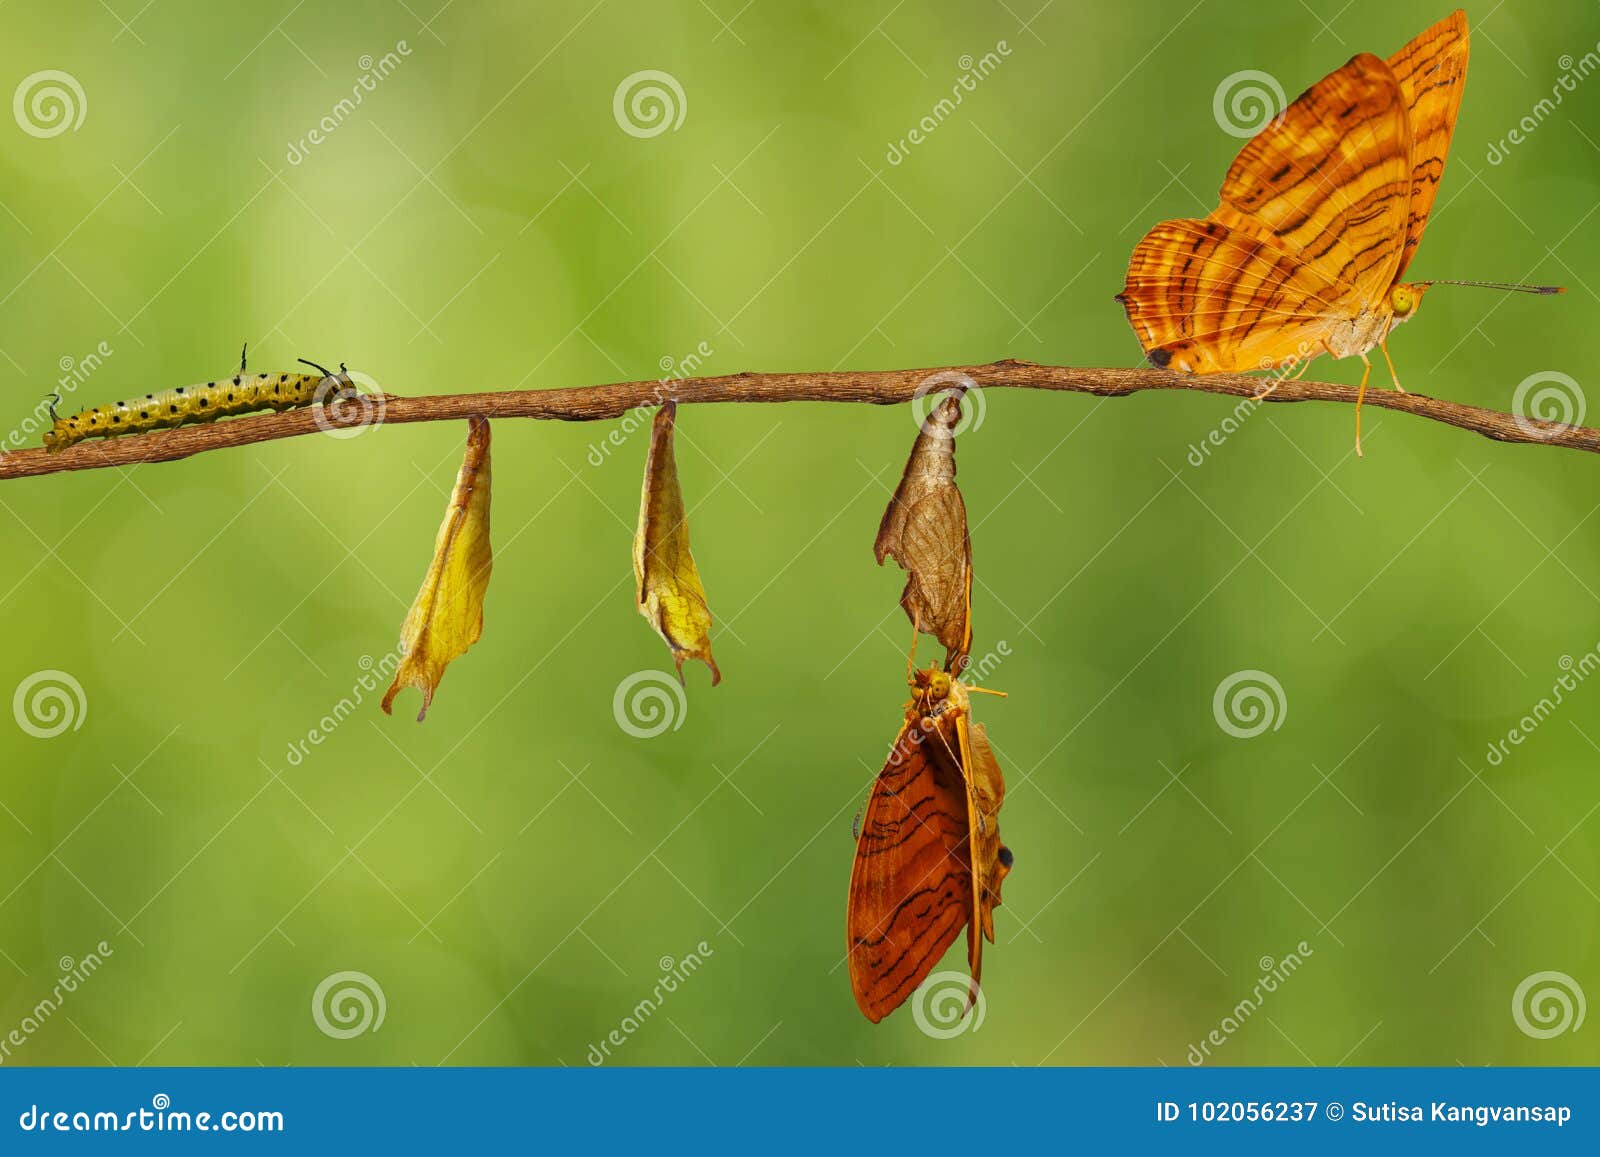 life cycle of common maplet chersonesia risa butterfly hangin